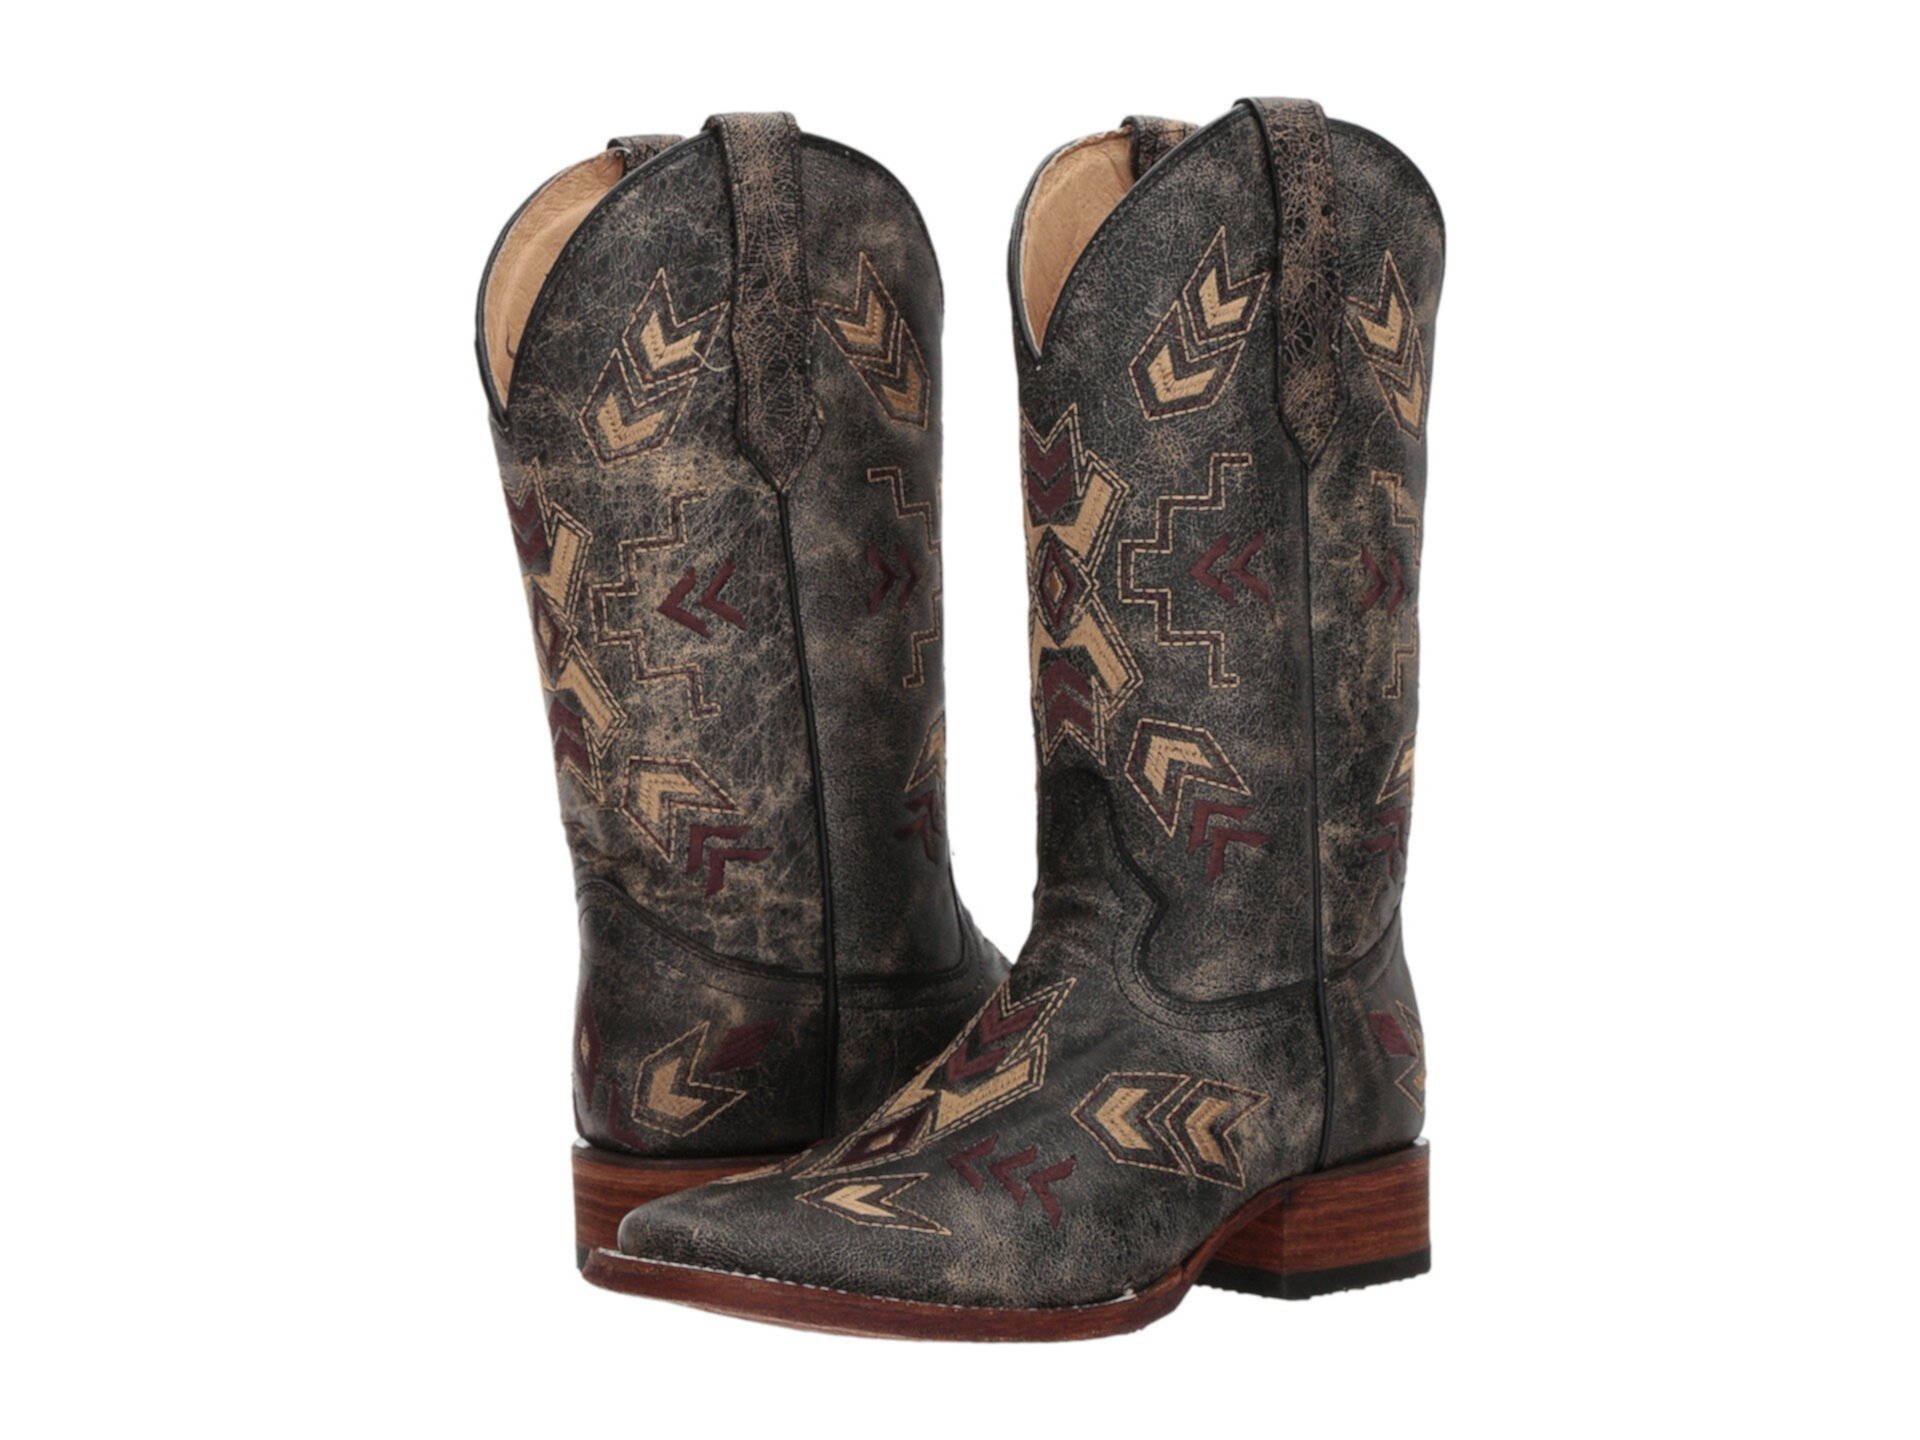 L5253 Corral Boots